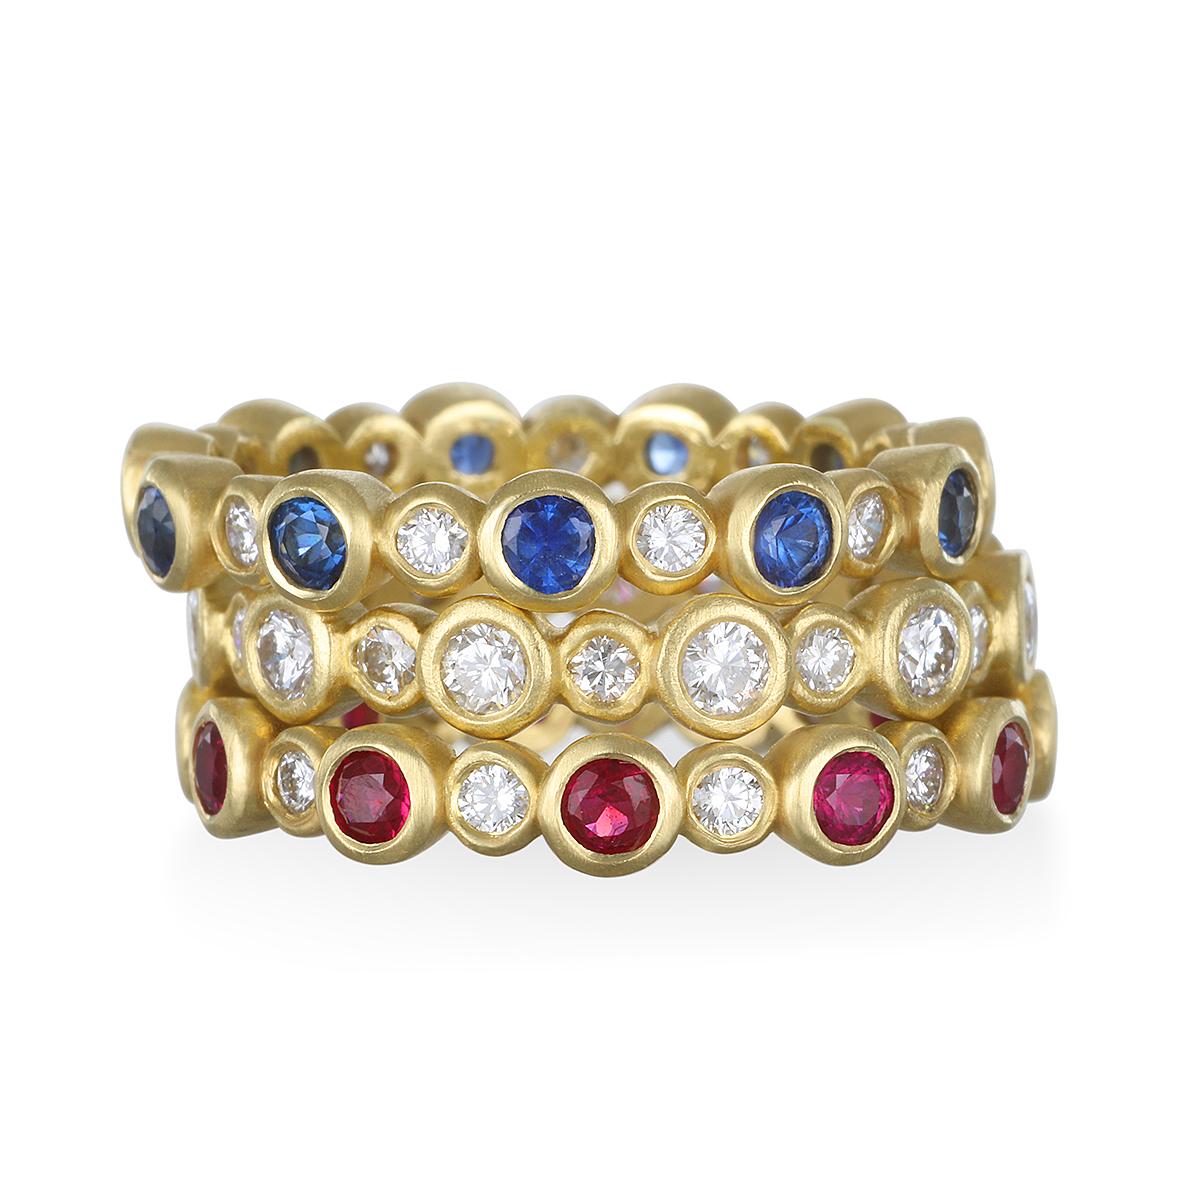 Contemporary Faye Kim 18 Karat Gold Diamond and Ruby Eternity Band Ring For Sale